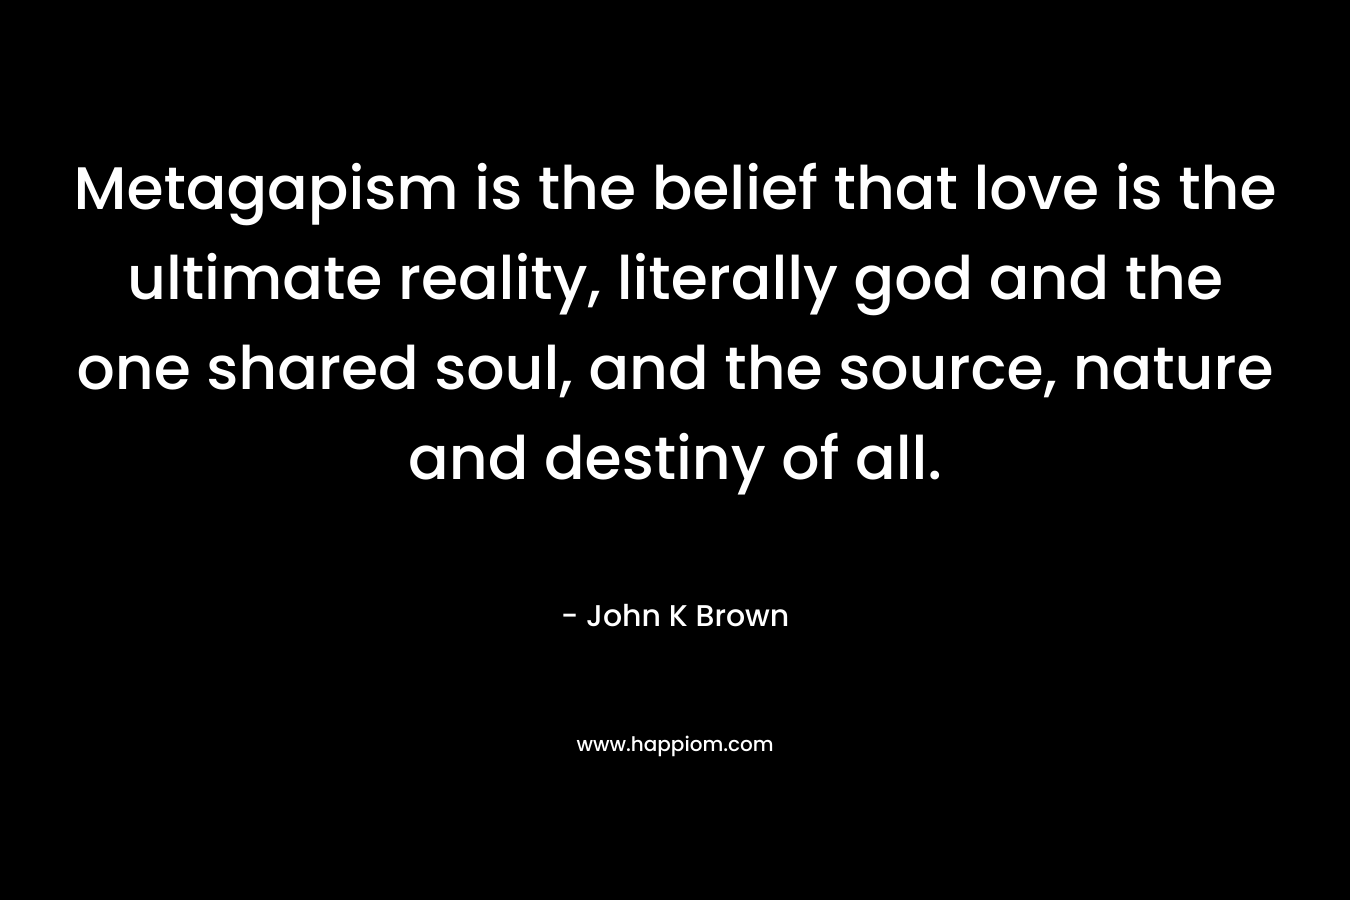 Metagapism is the belief that love is the ultimate reality, literally god and the one shared soul, and the source, nature and destiny of all.